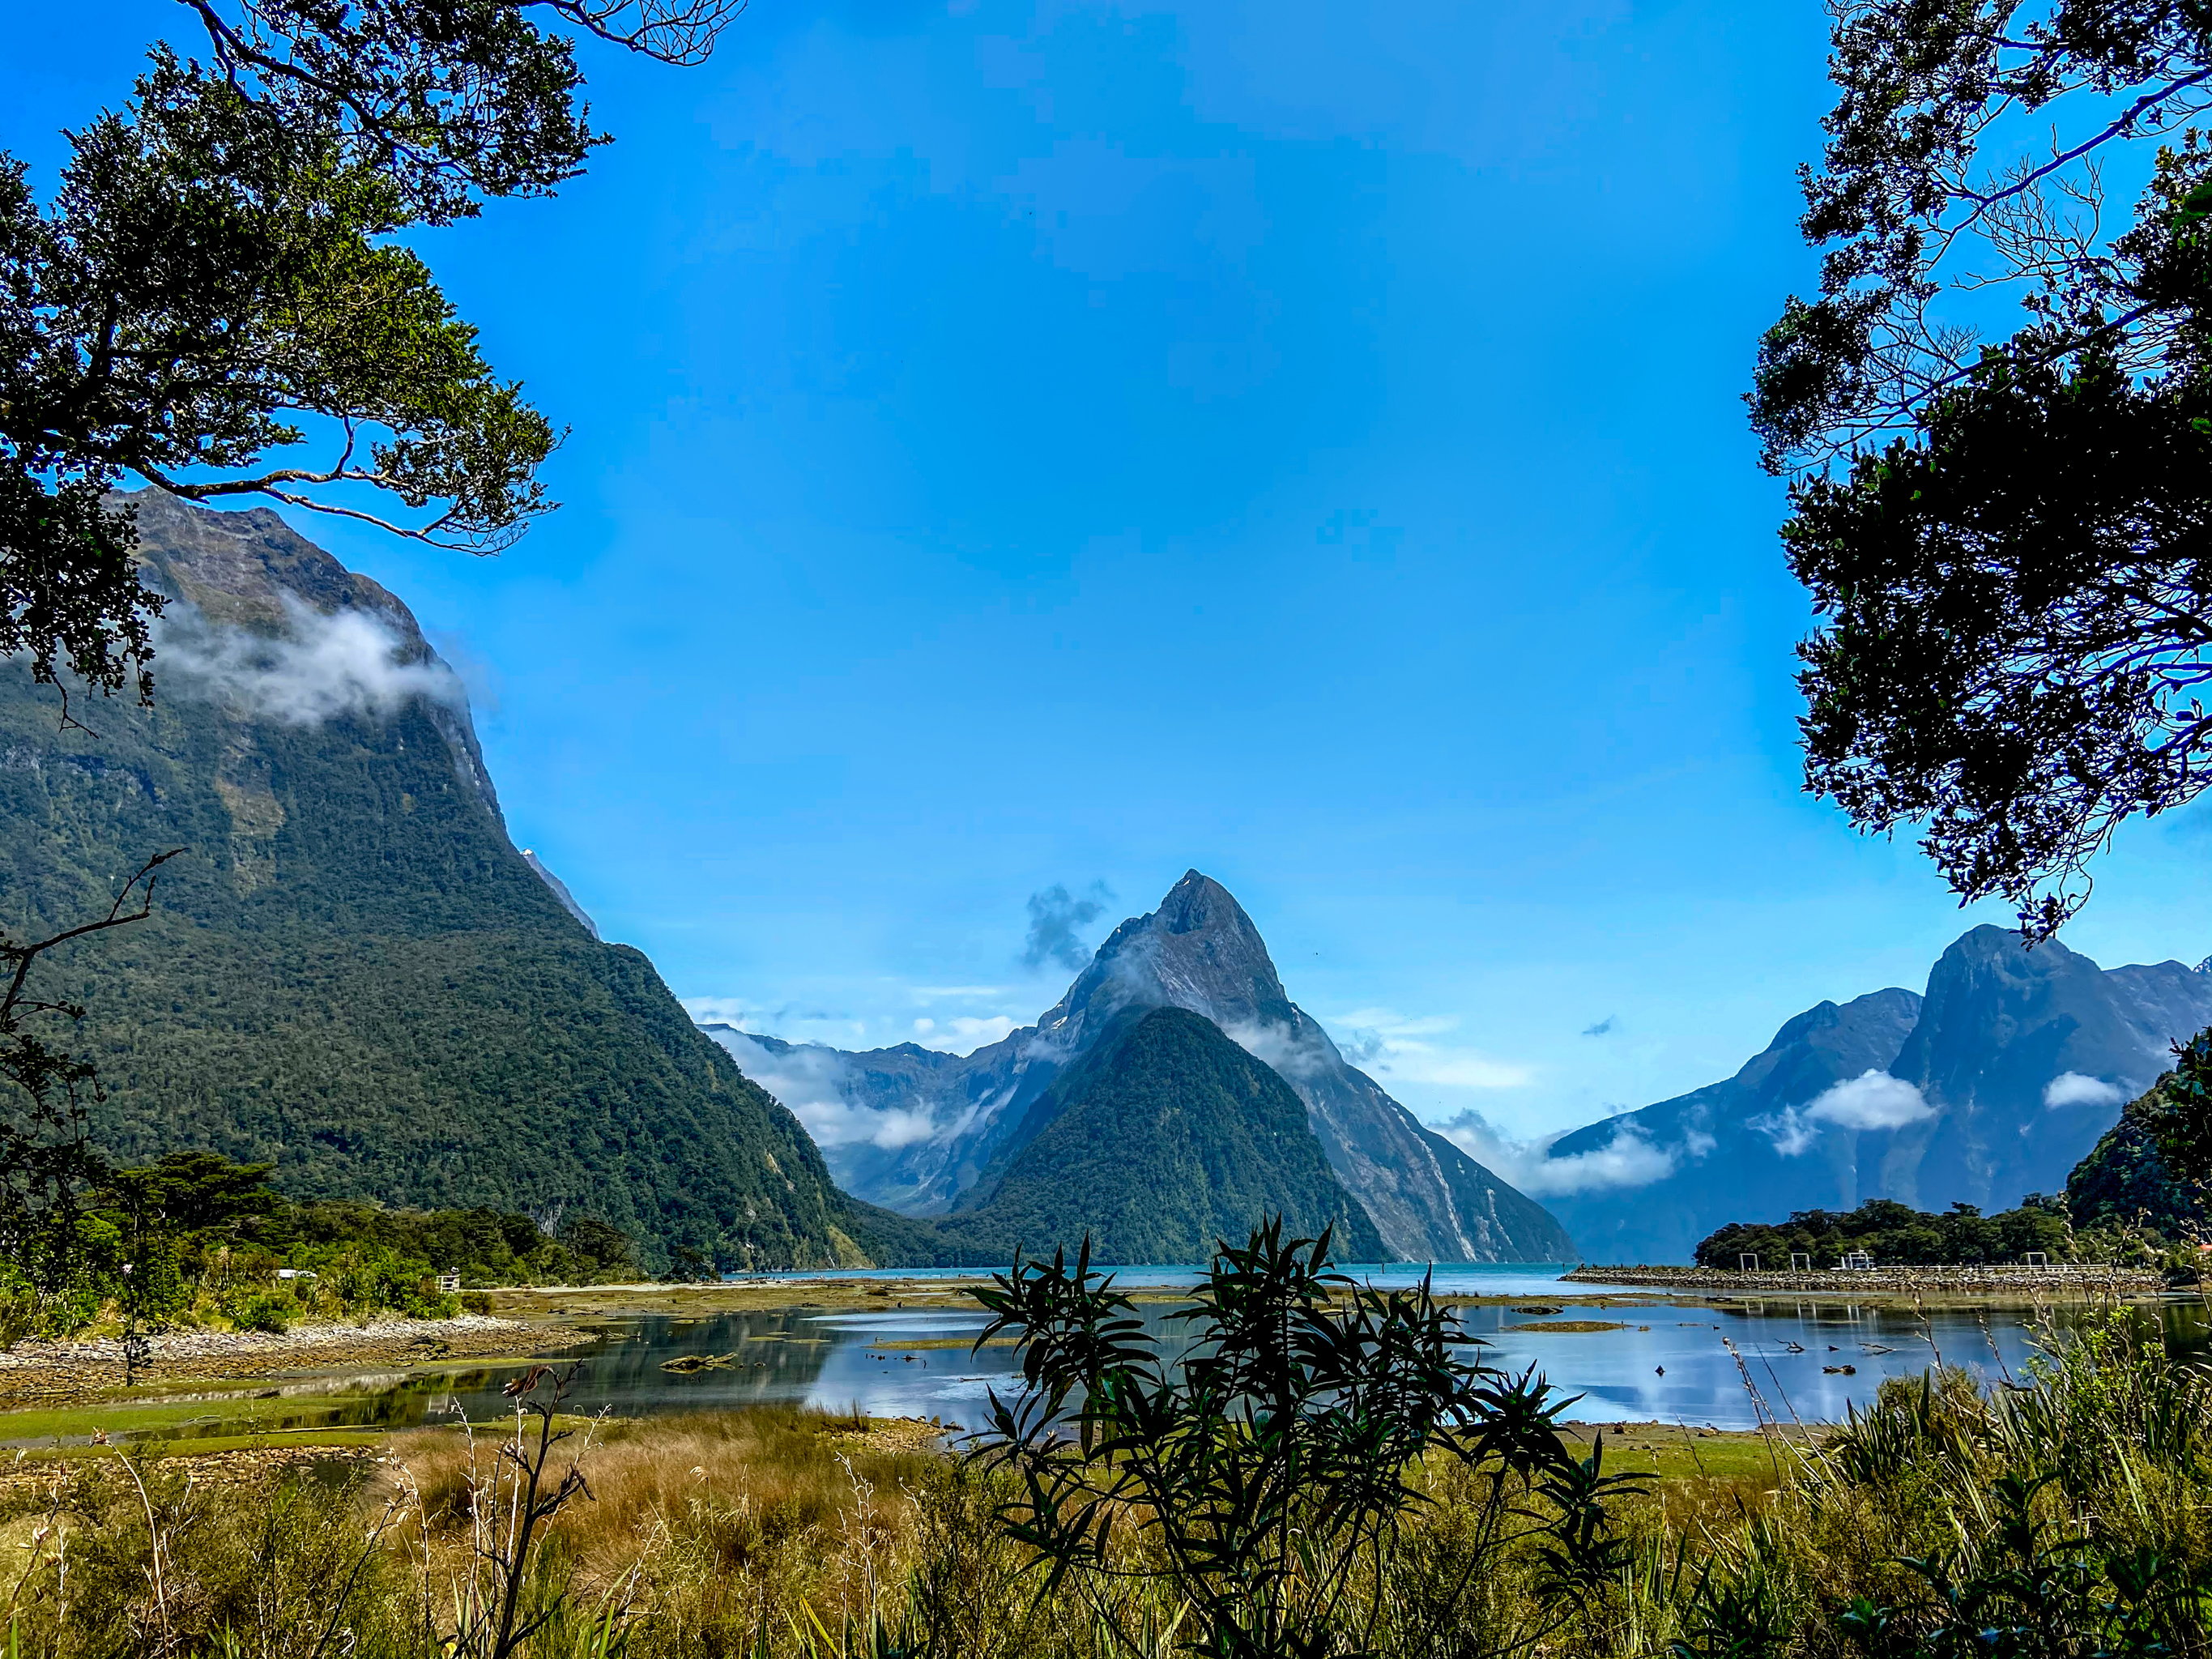 Mitre Peak at Milford Sound during our New Zealand Road trip through South Island